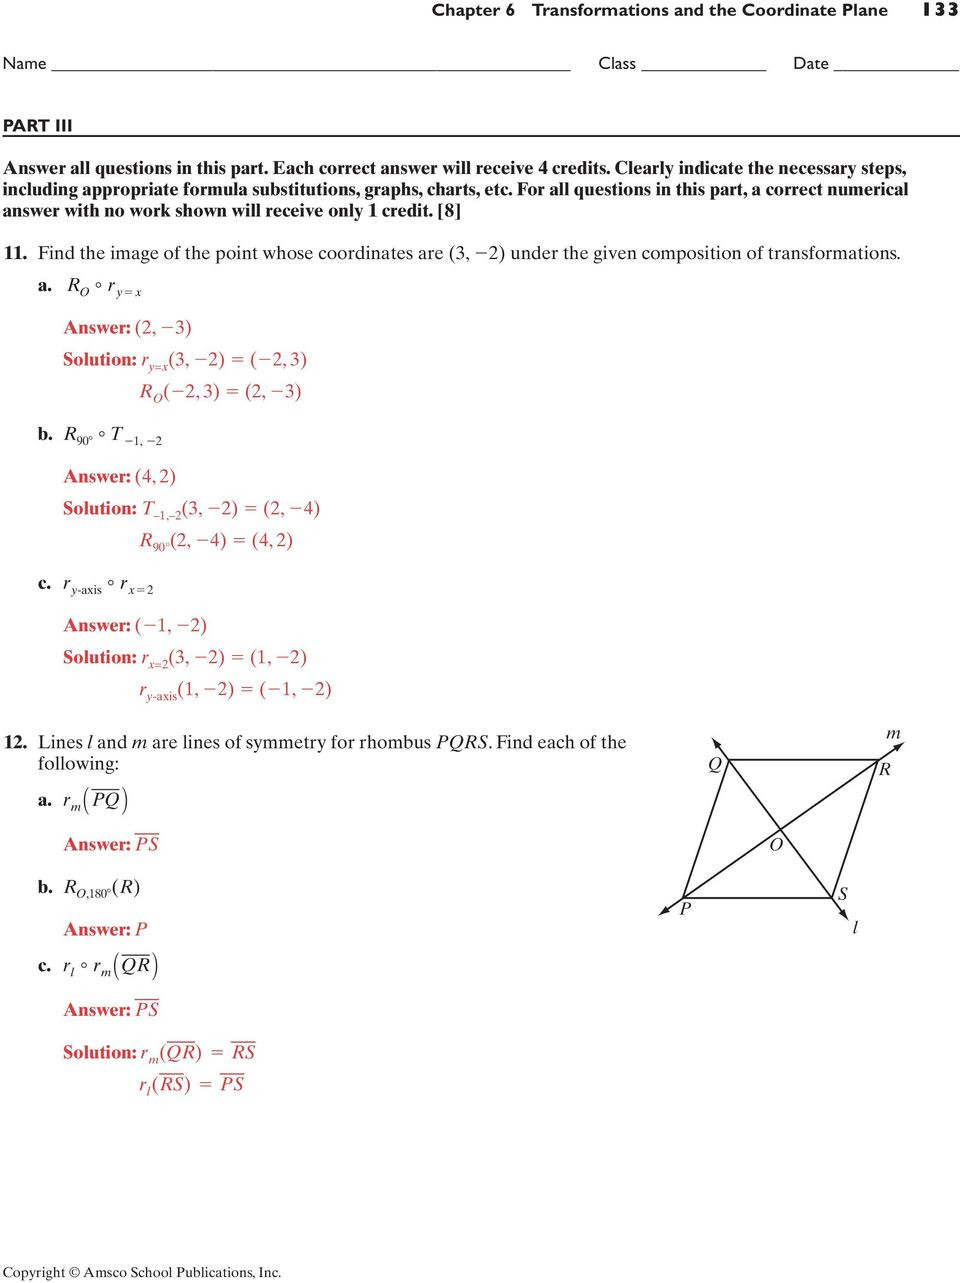 Composition Of Transformations Worksheet 116 Chapter 6 Transformations and the Coordinate Plane Pdf